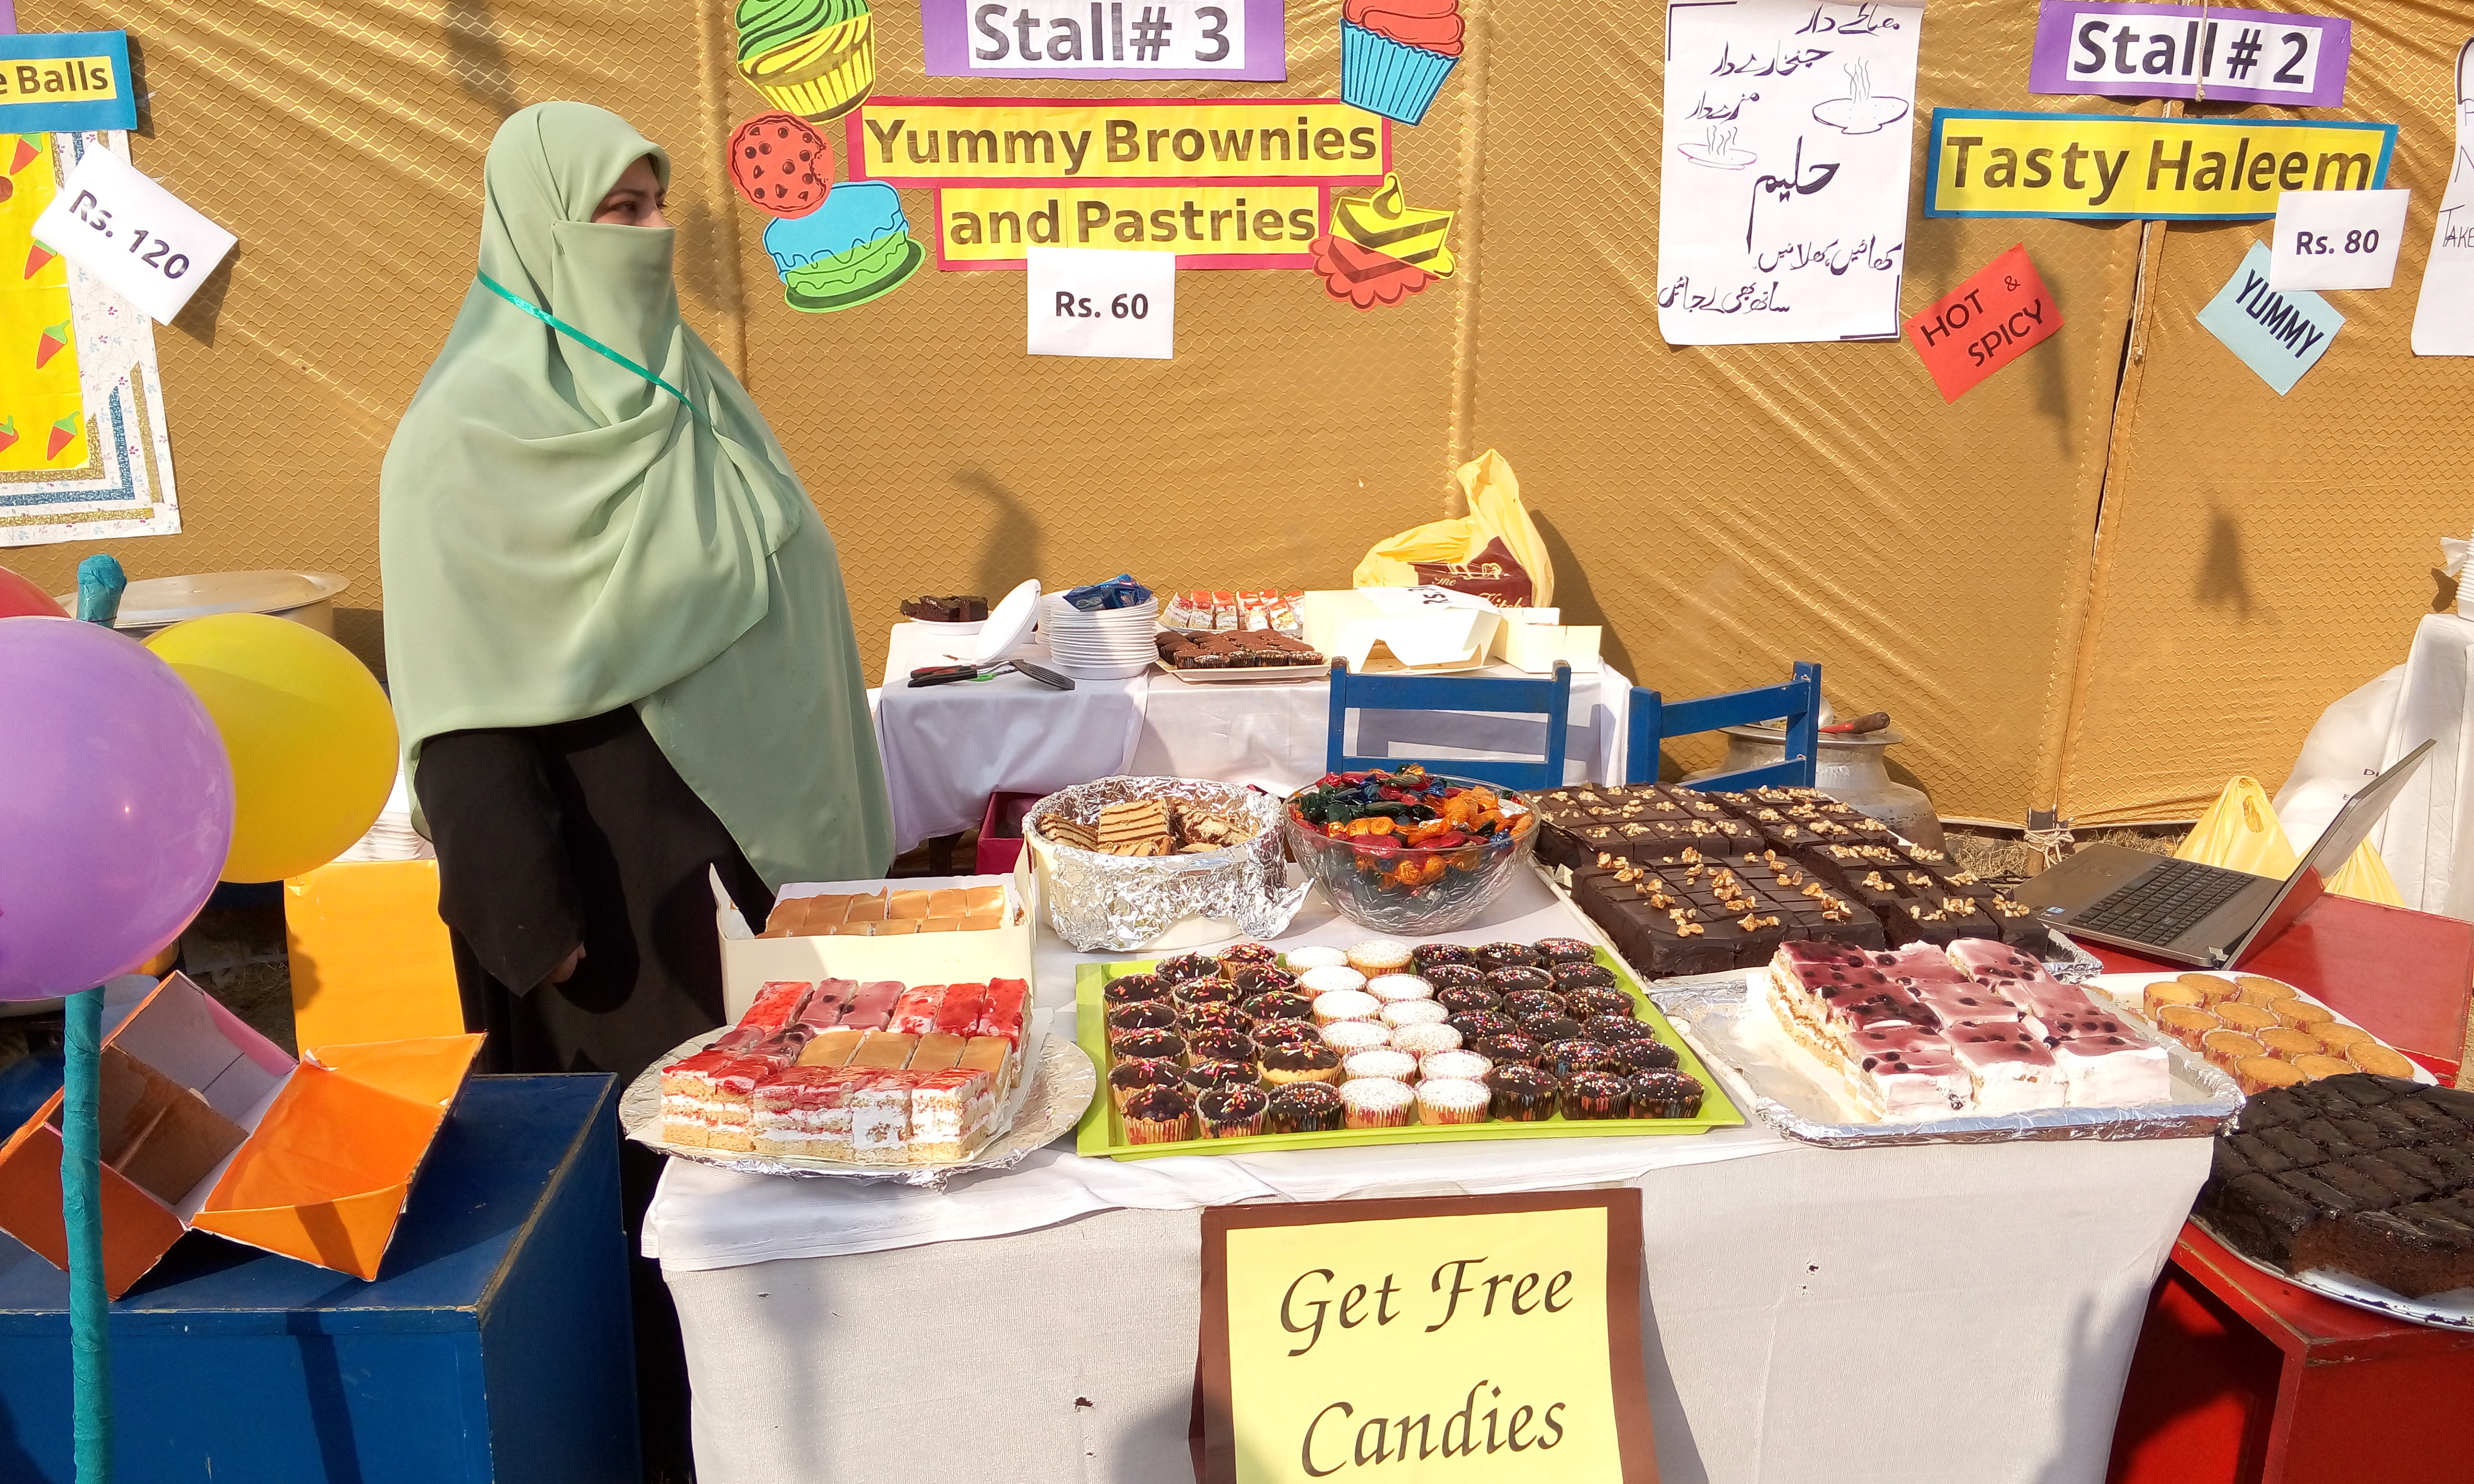 Stall 3 - Yummy Brownies & Pastries